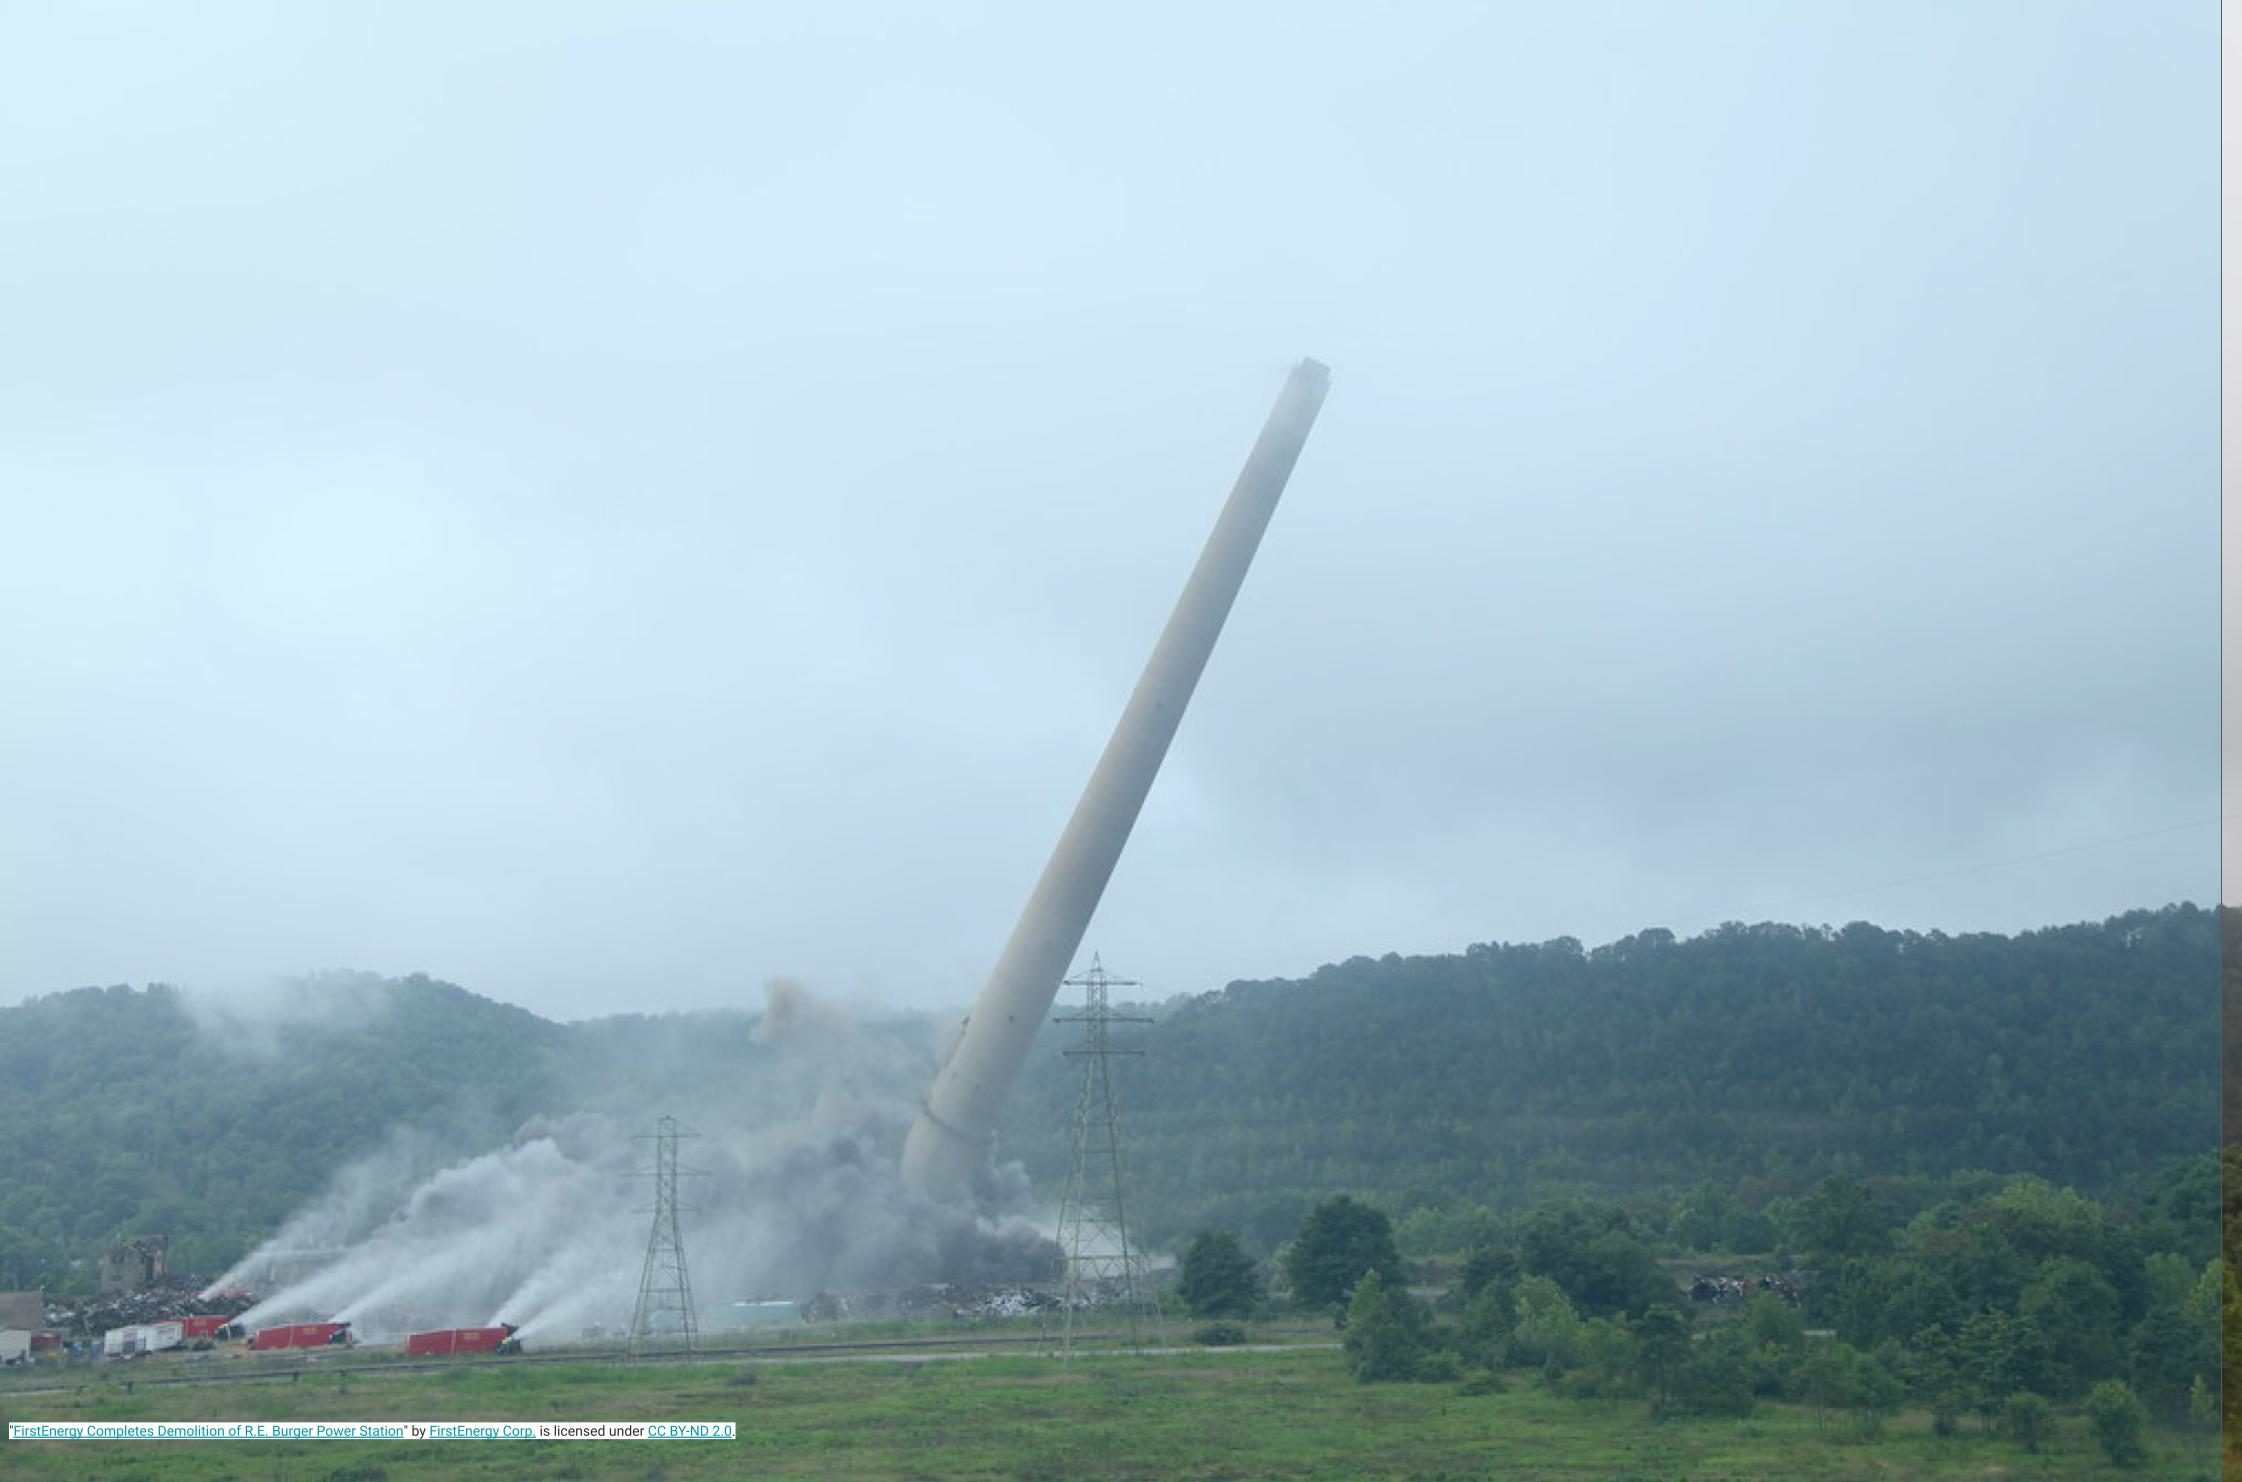 Coal powerplant tower collapsing in a demolition, surrounded by spraying fire engines. Background is a green hill and cloudy sky.